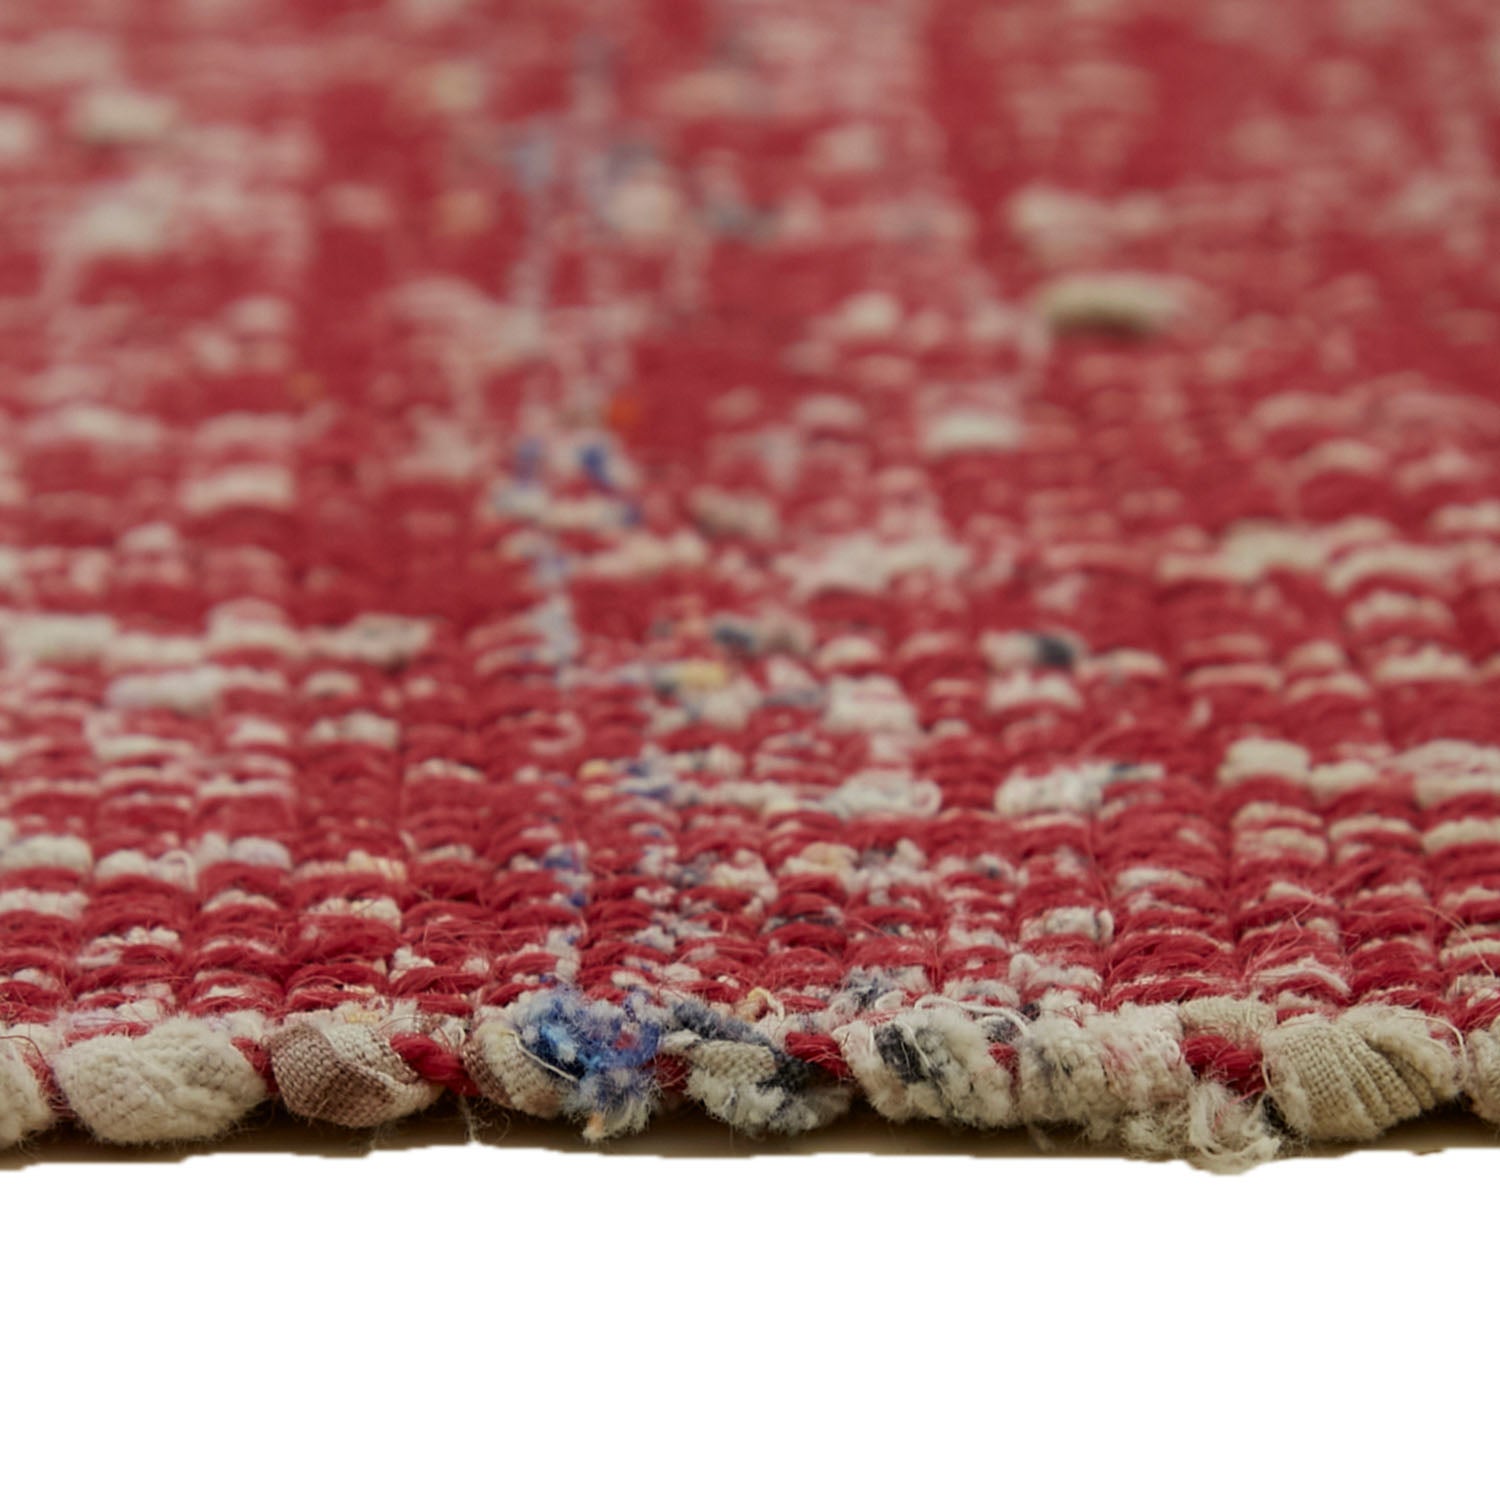 Close-up of a worn red and white woven fabric texture.